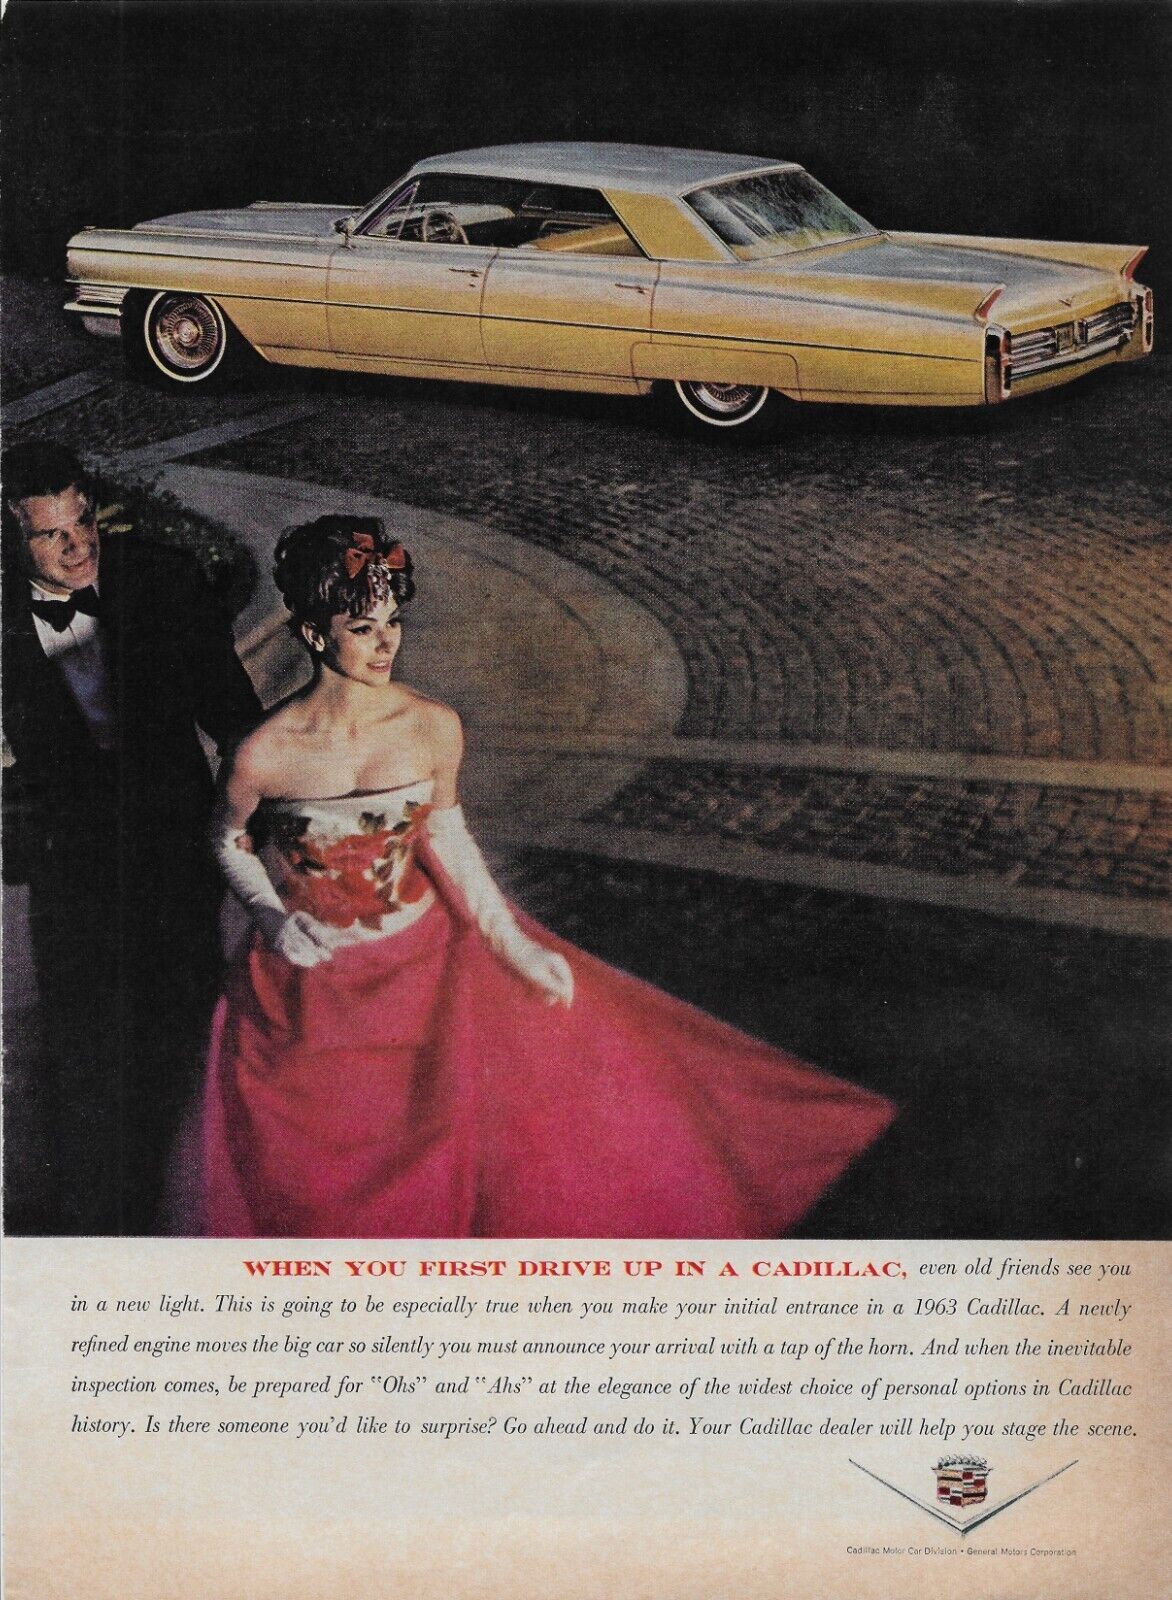 1963 Cadillac When You First Drive Up Impress Red Evening Gown Vintage Print Ad